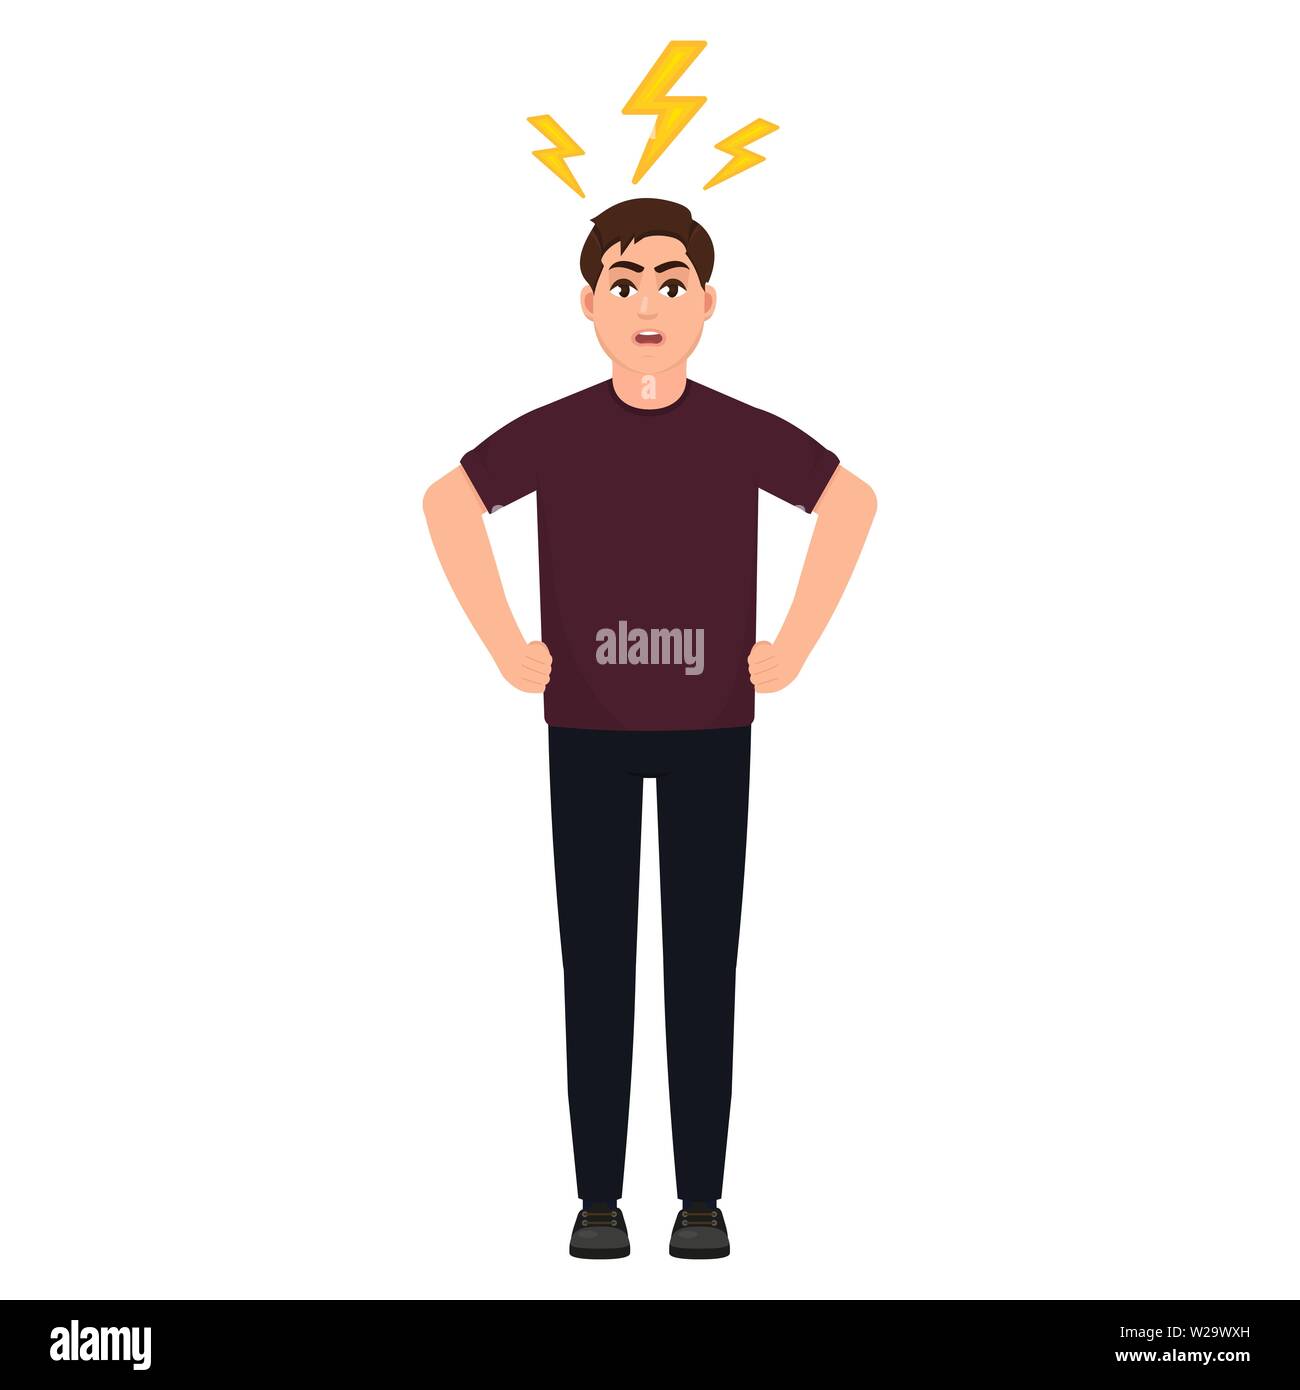 Man in anger, angry guy, lightning over a man's head, headache, cartoon character vector illustration Stock Vector